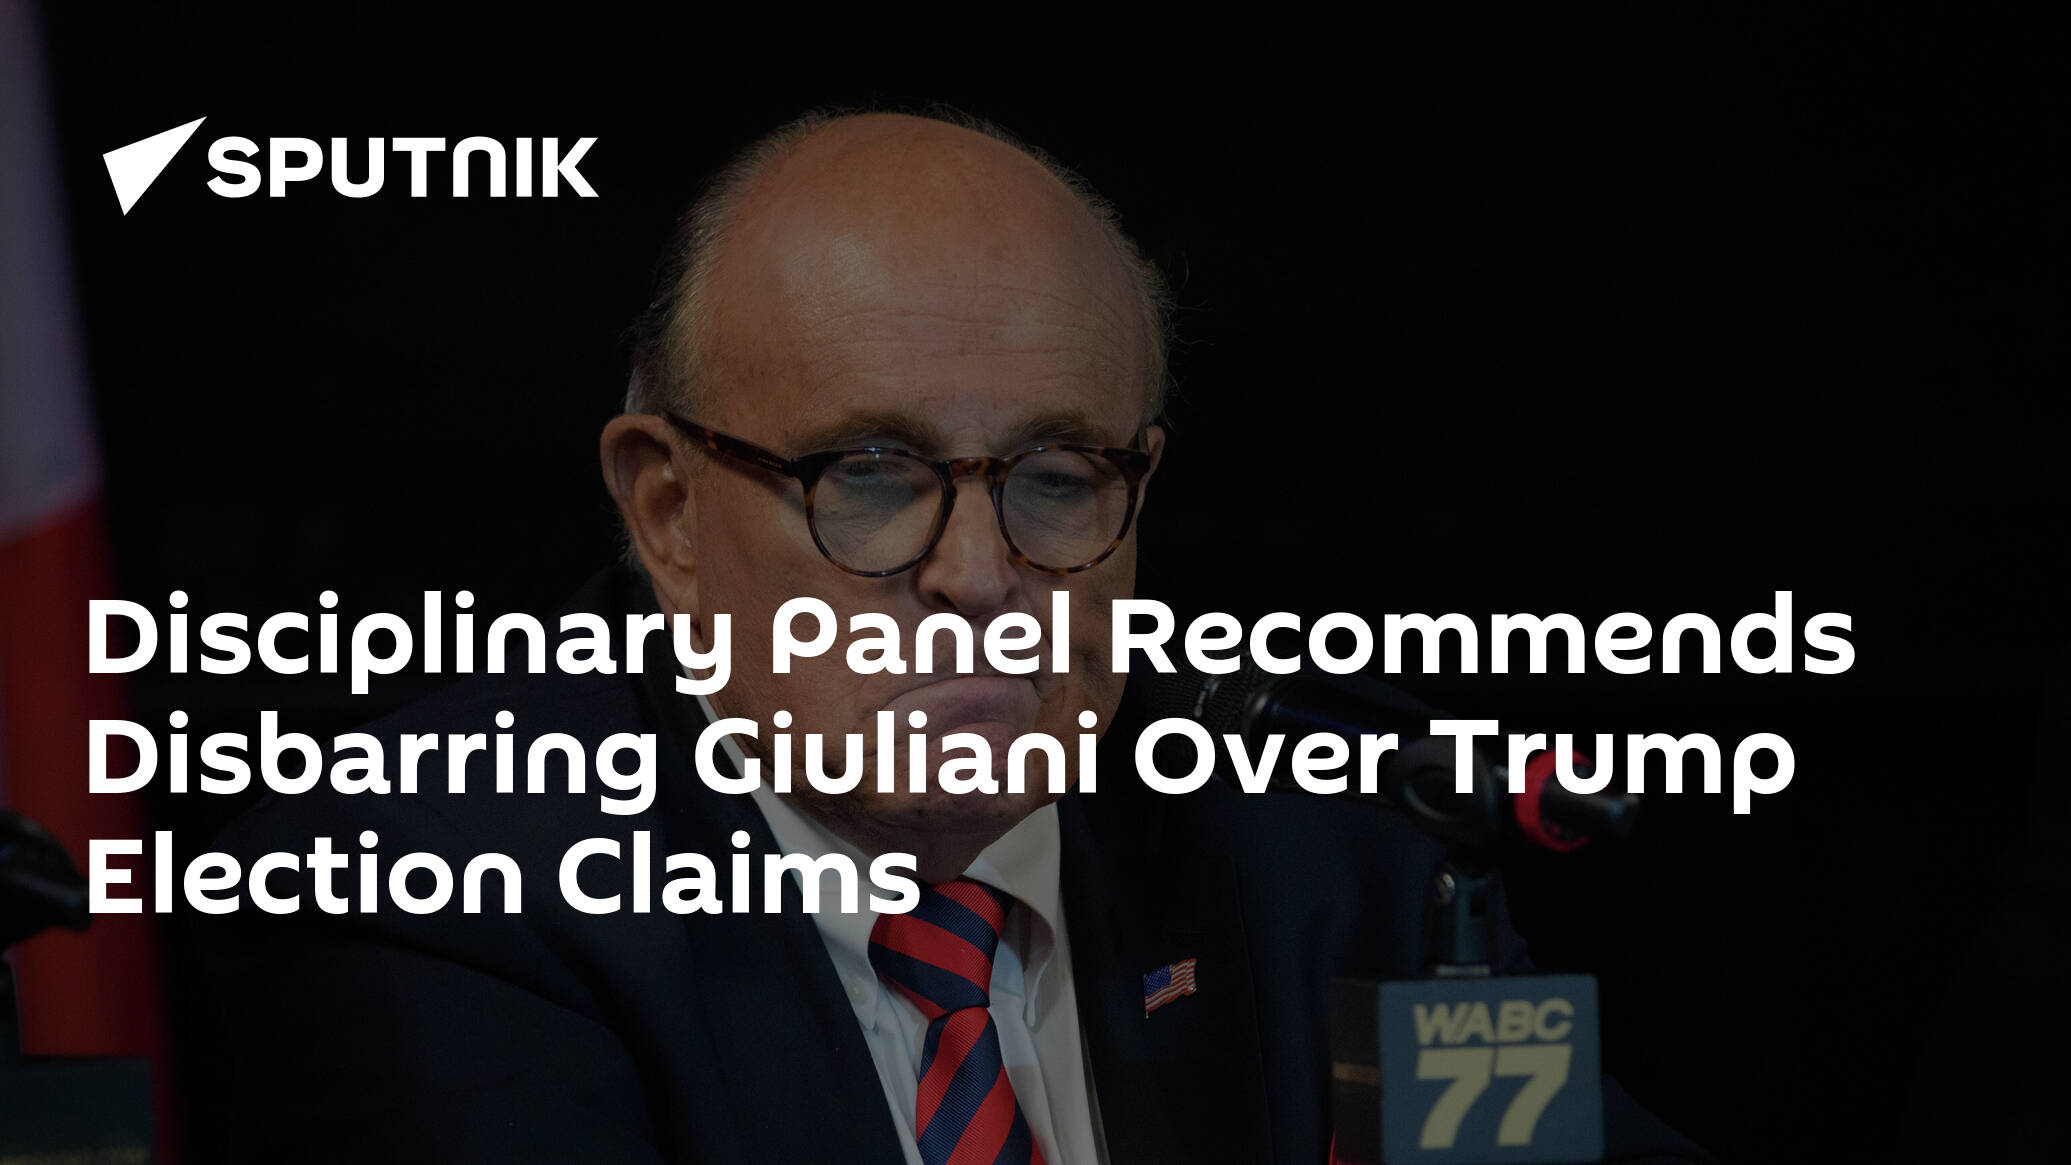 Disciplinary Panel Recommends Disbarring Giuliani Over Trump Election Claims